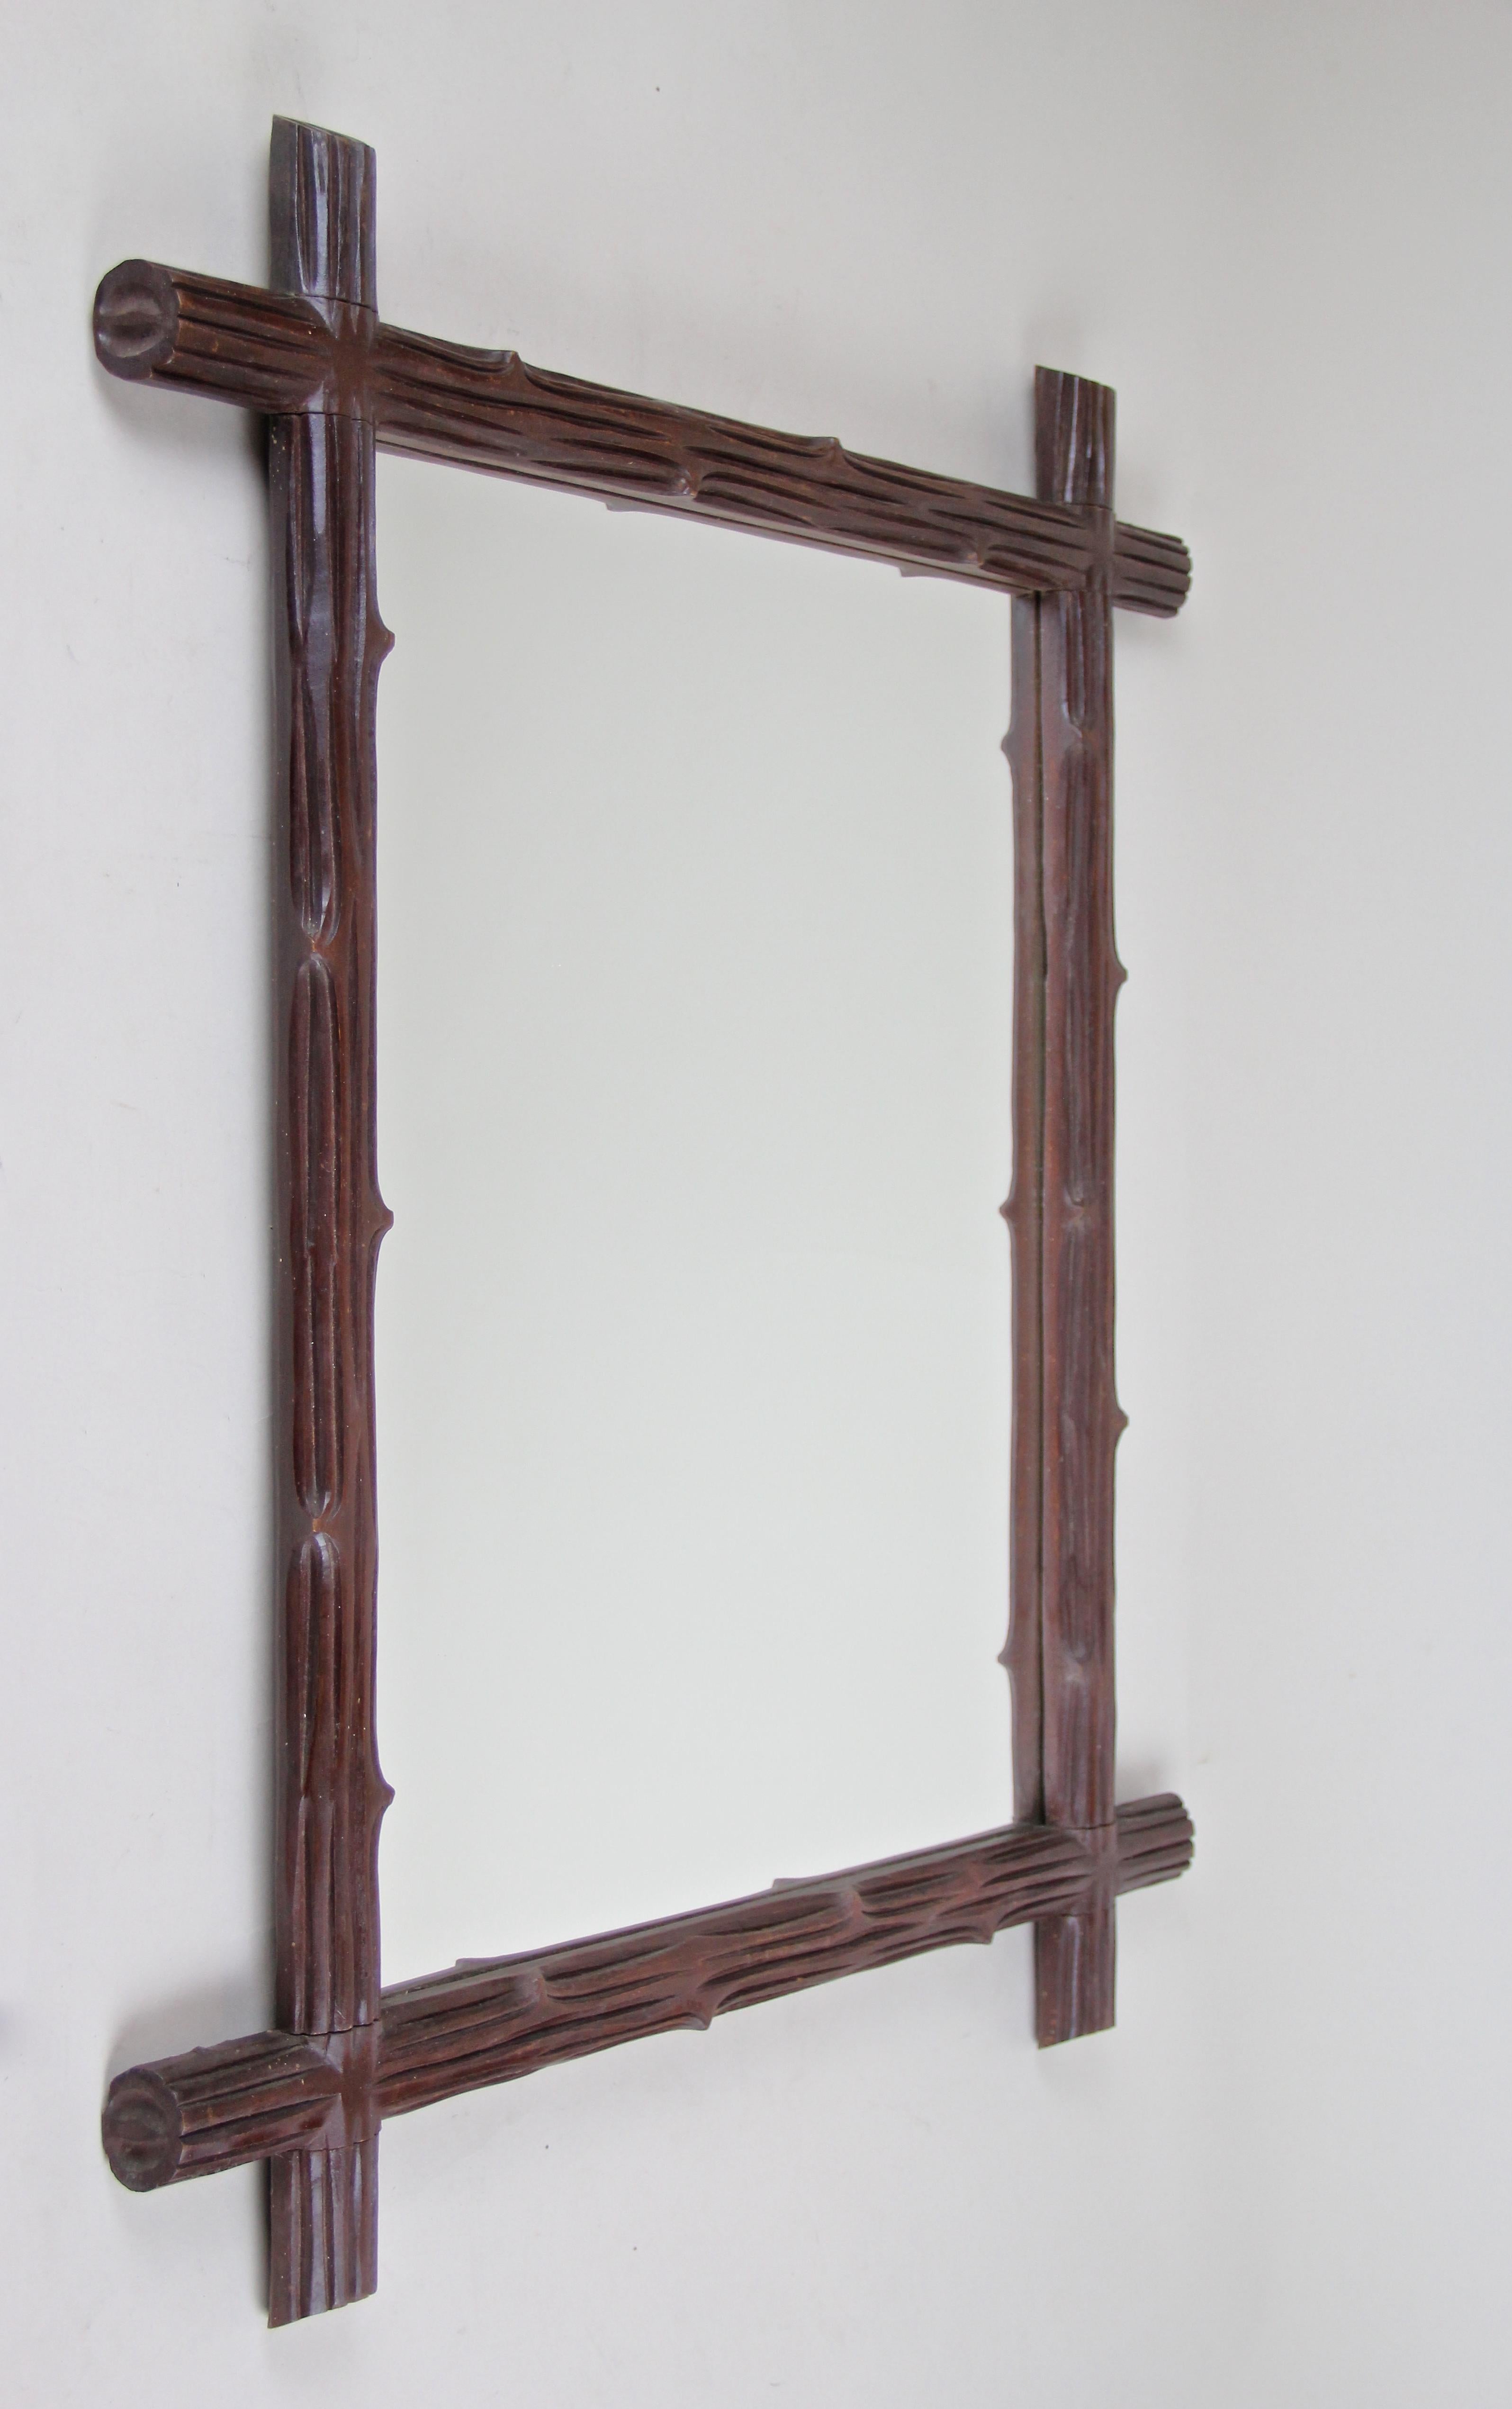 From circa 1900, the turn of the century in Austria comes this lovely wooden black forest wall mirror. A simple but elegant design was created out of hand carved basswood, showing the typical 